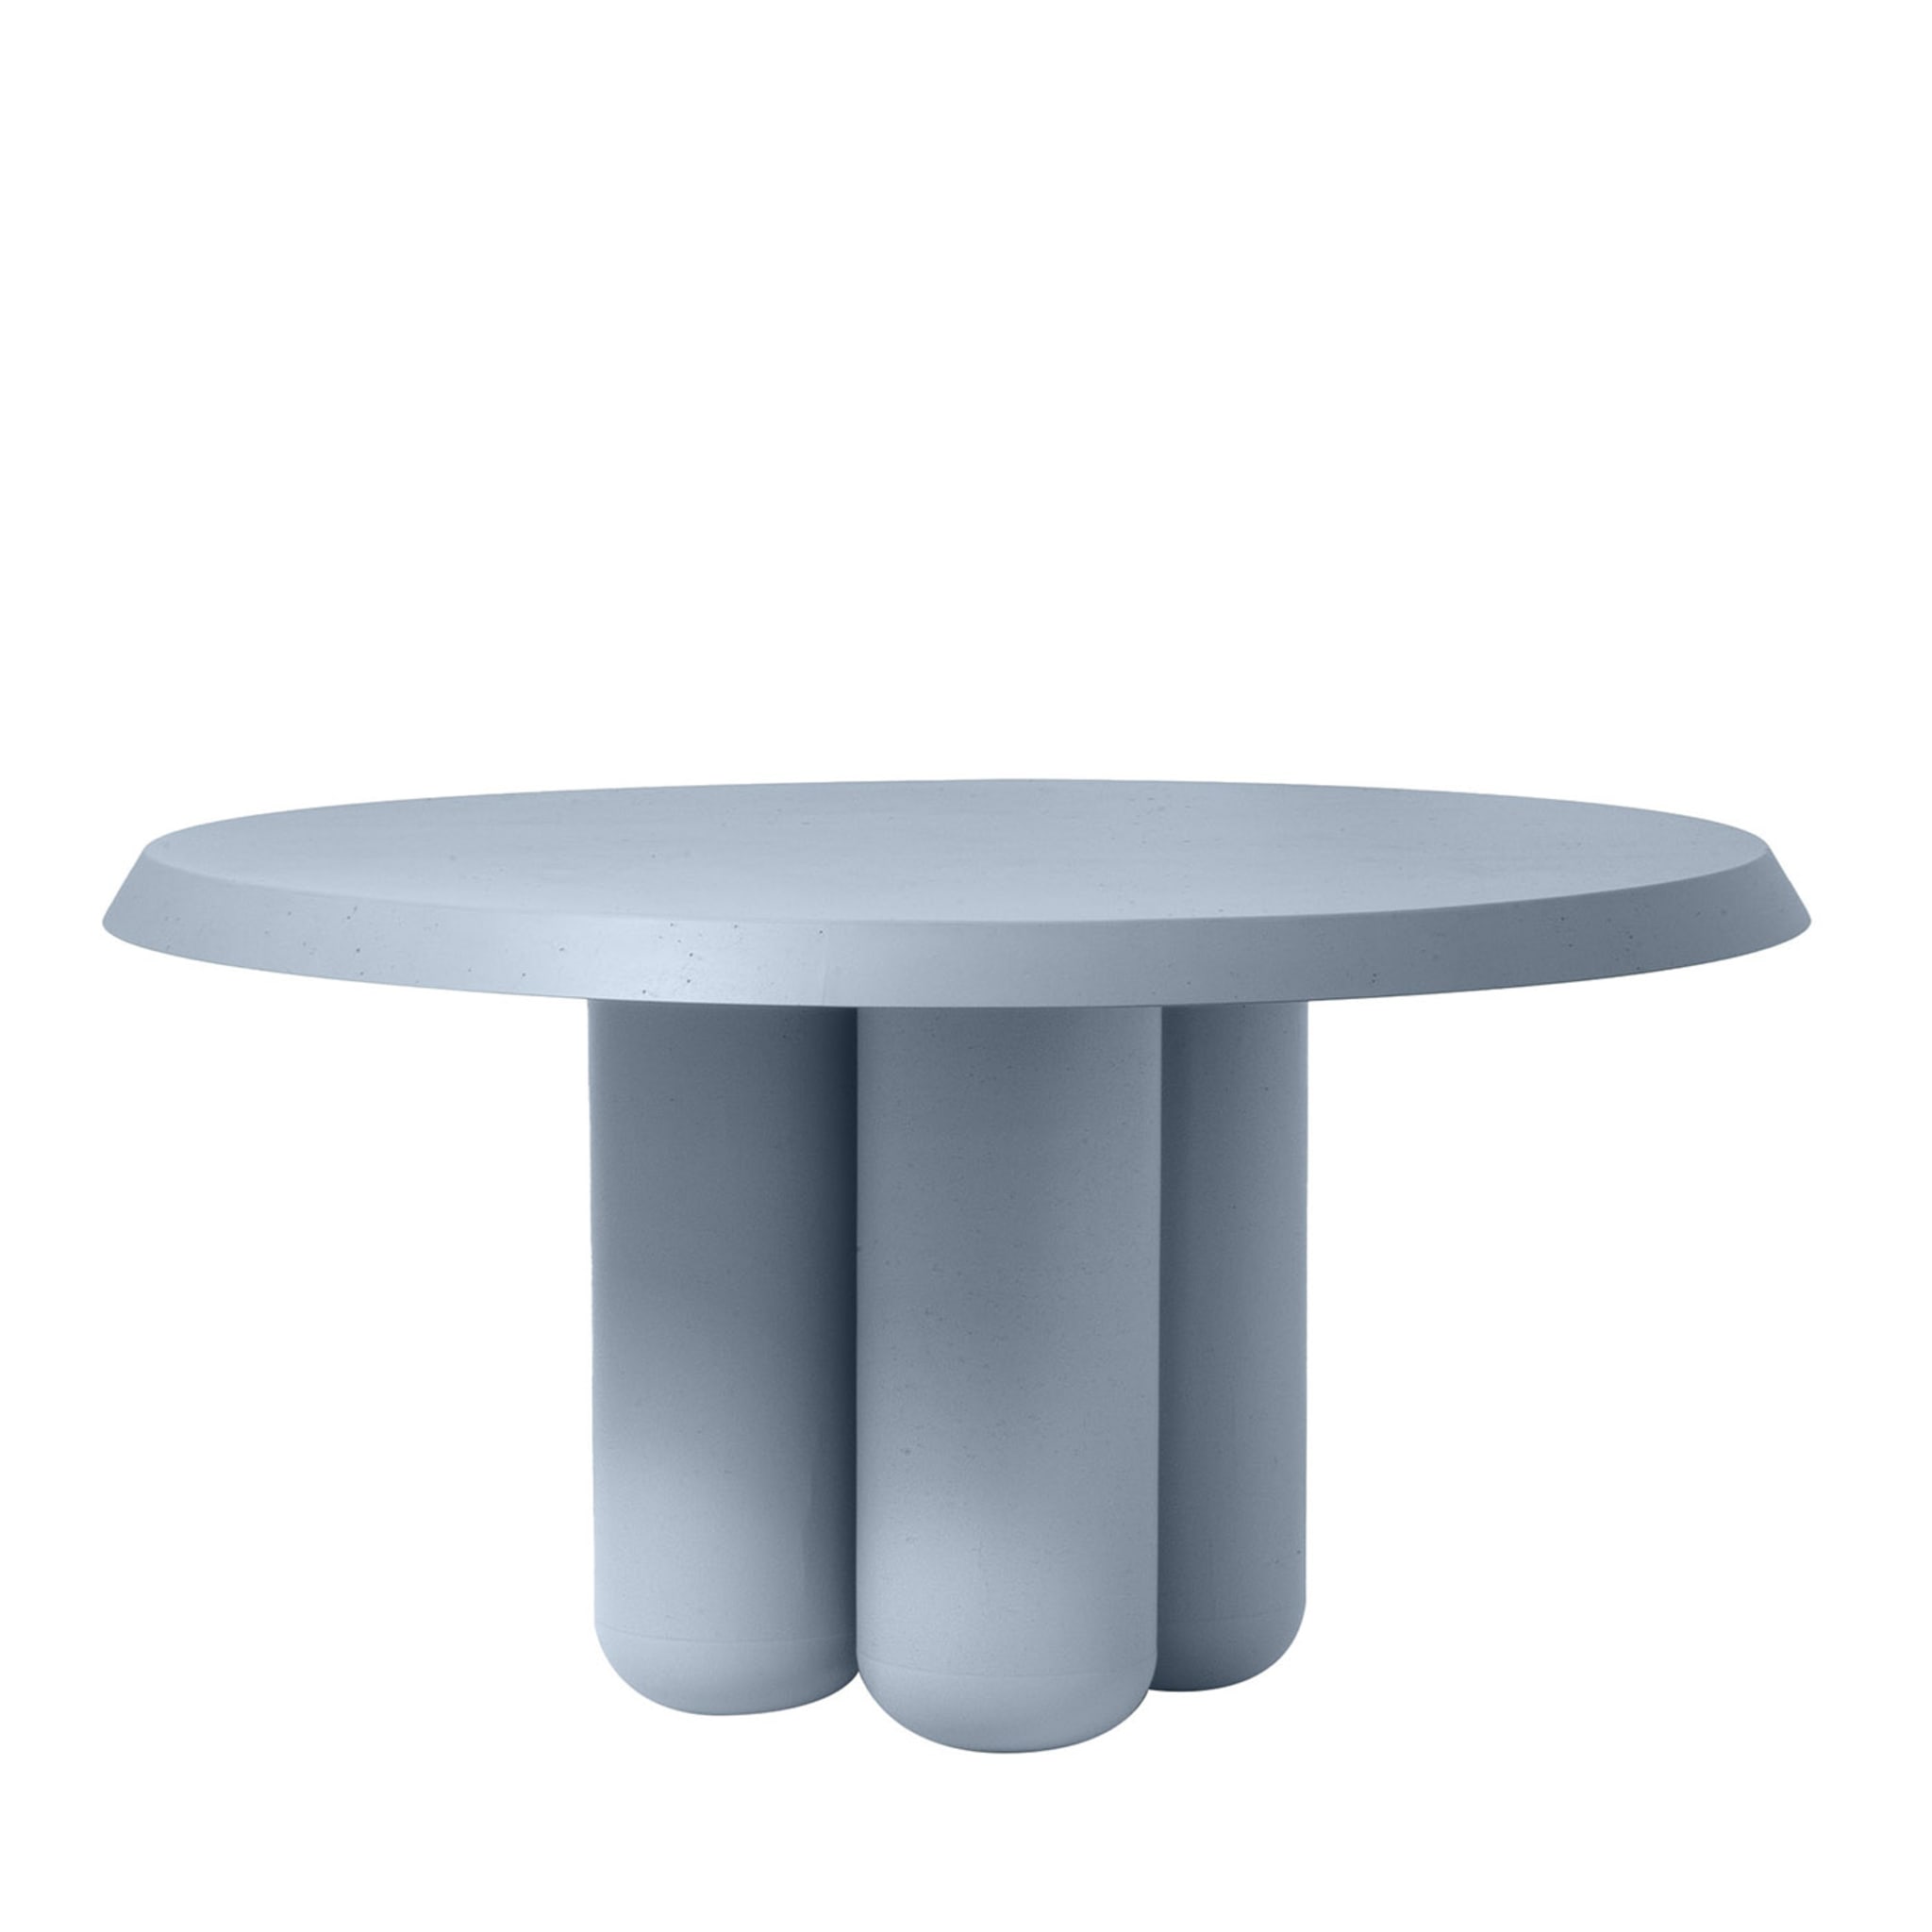 Giudecca Dining Table by Parisotto and Formenton - Main view